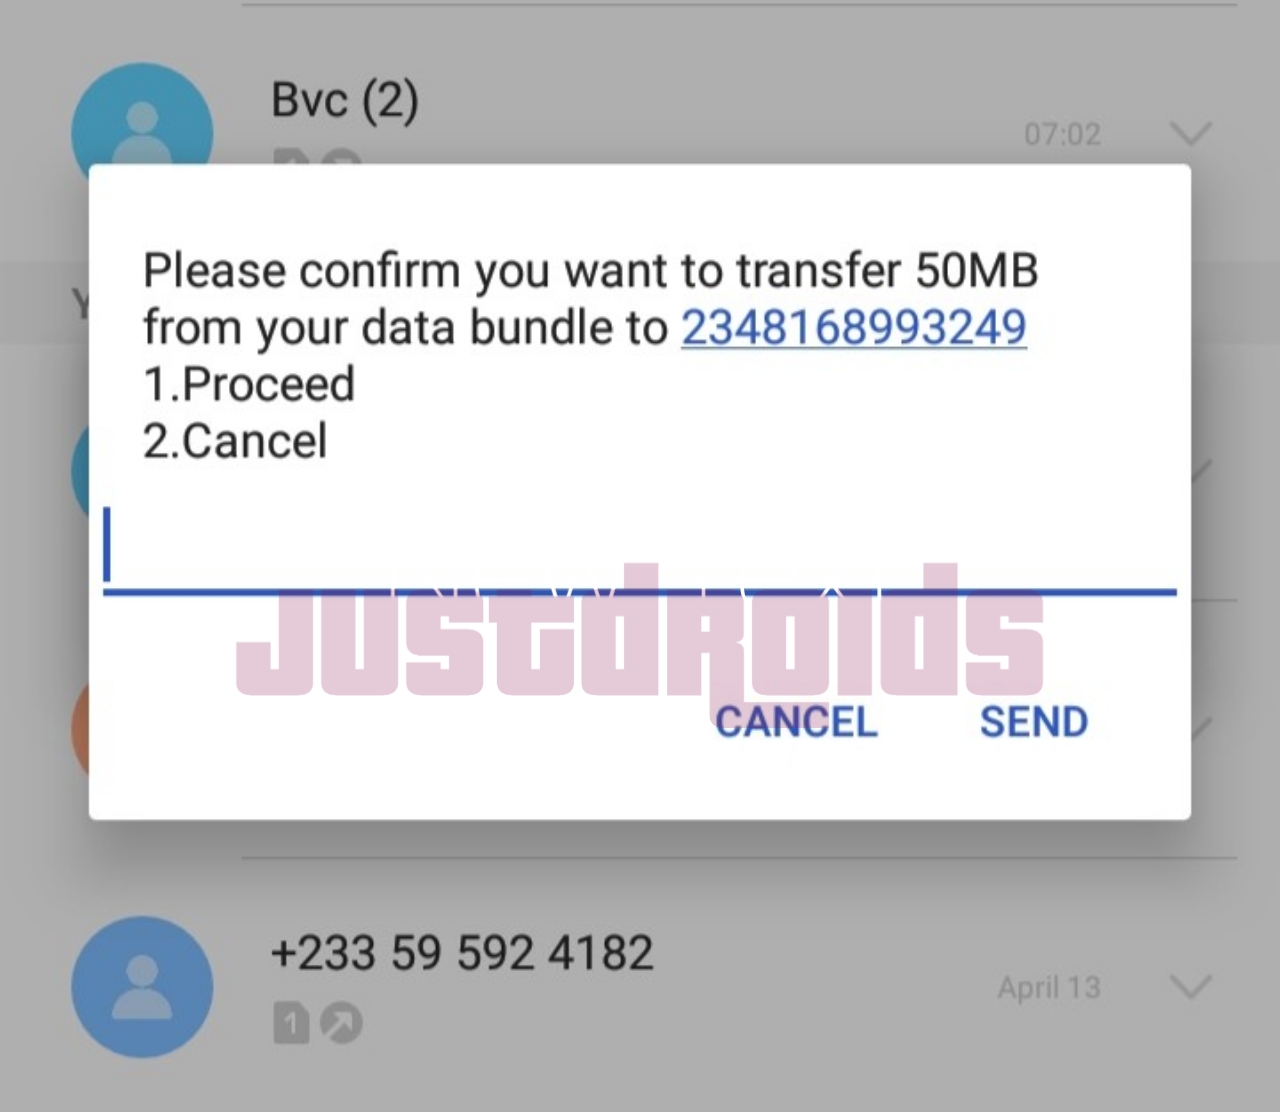 How to transfer/share data on Mtn to a friend's line